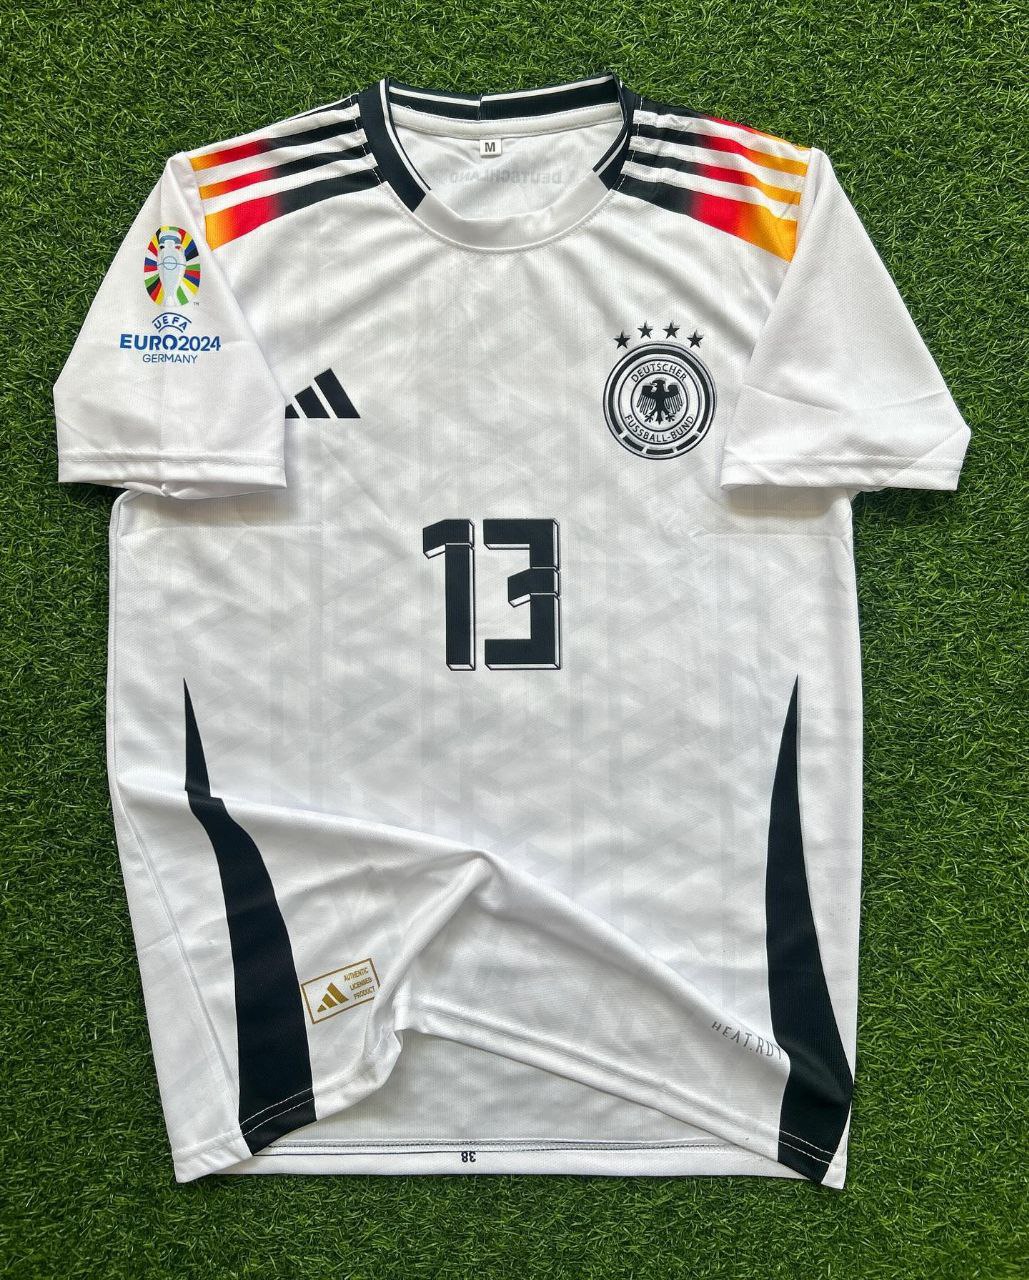 Euro 2024 Thomas Müller Germany Jersey